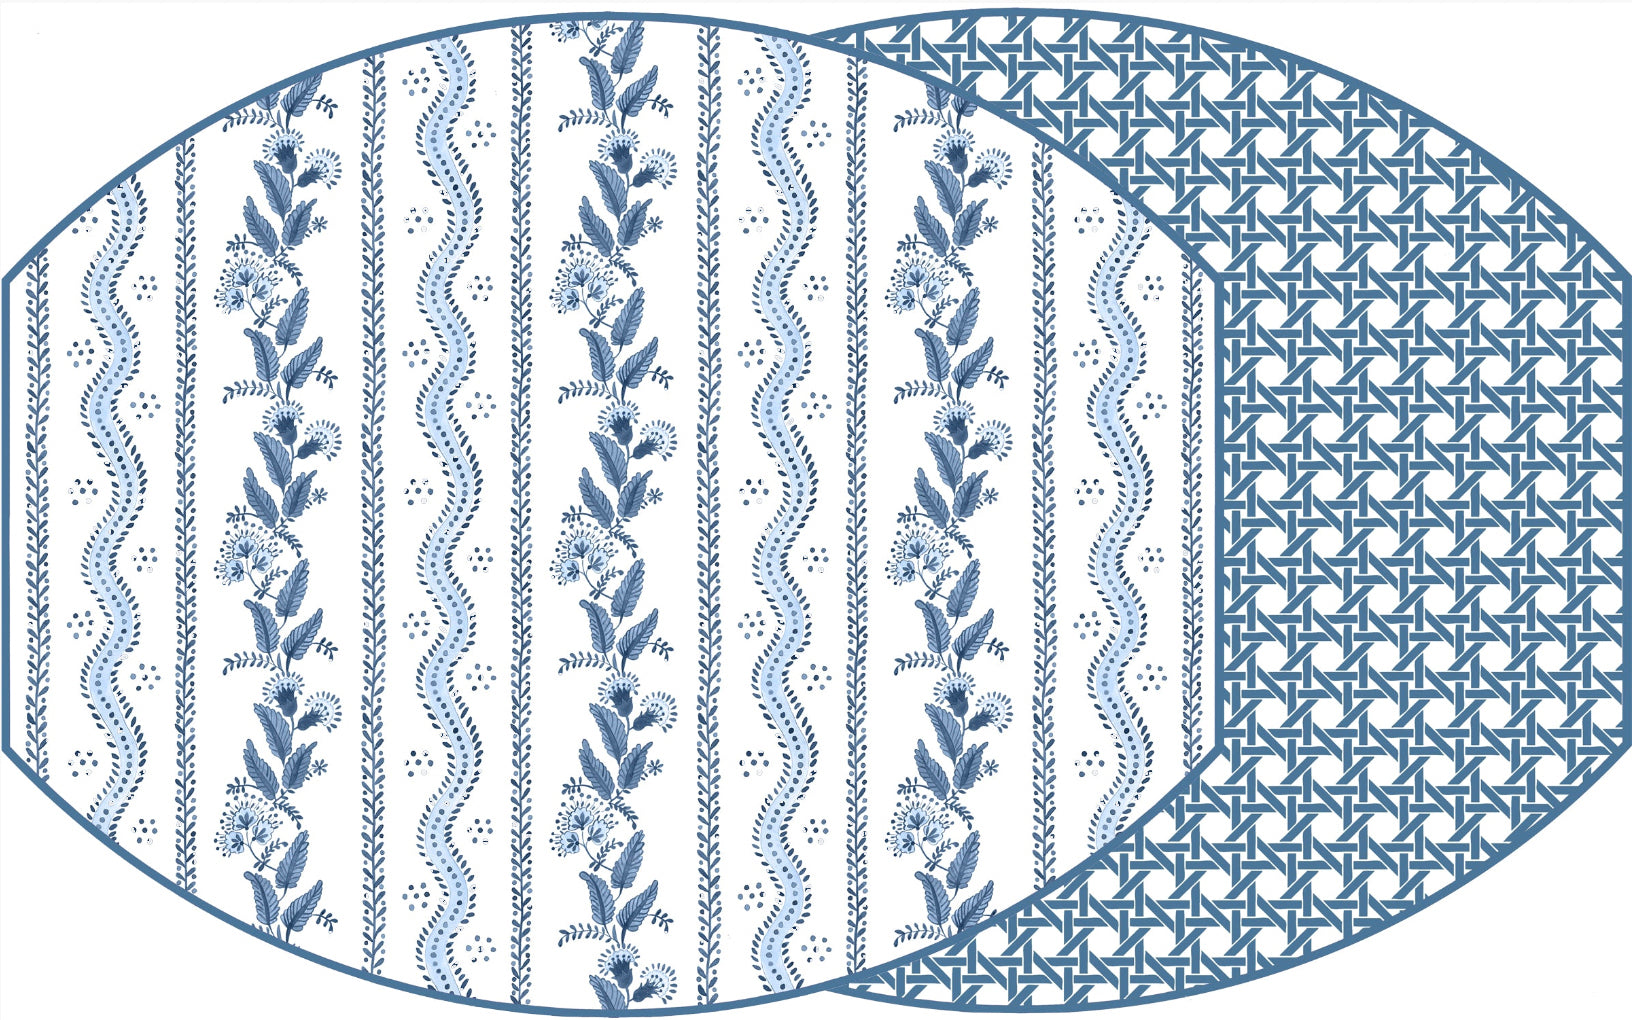 ELLIPSE TWO SIDED EMMA AND CANE PLACEMAT ~ CADET BLUE